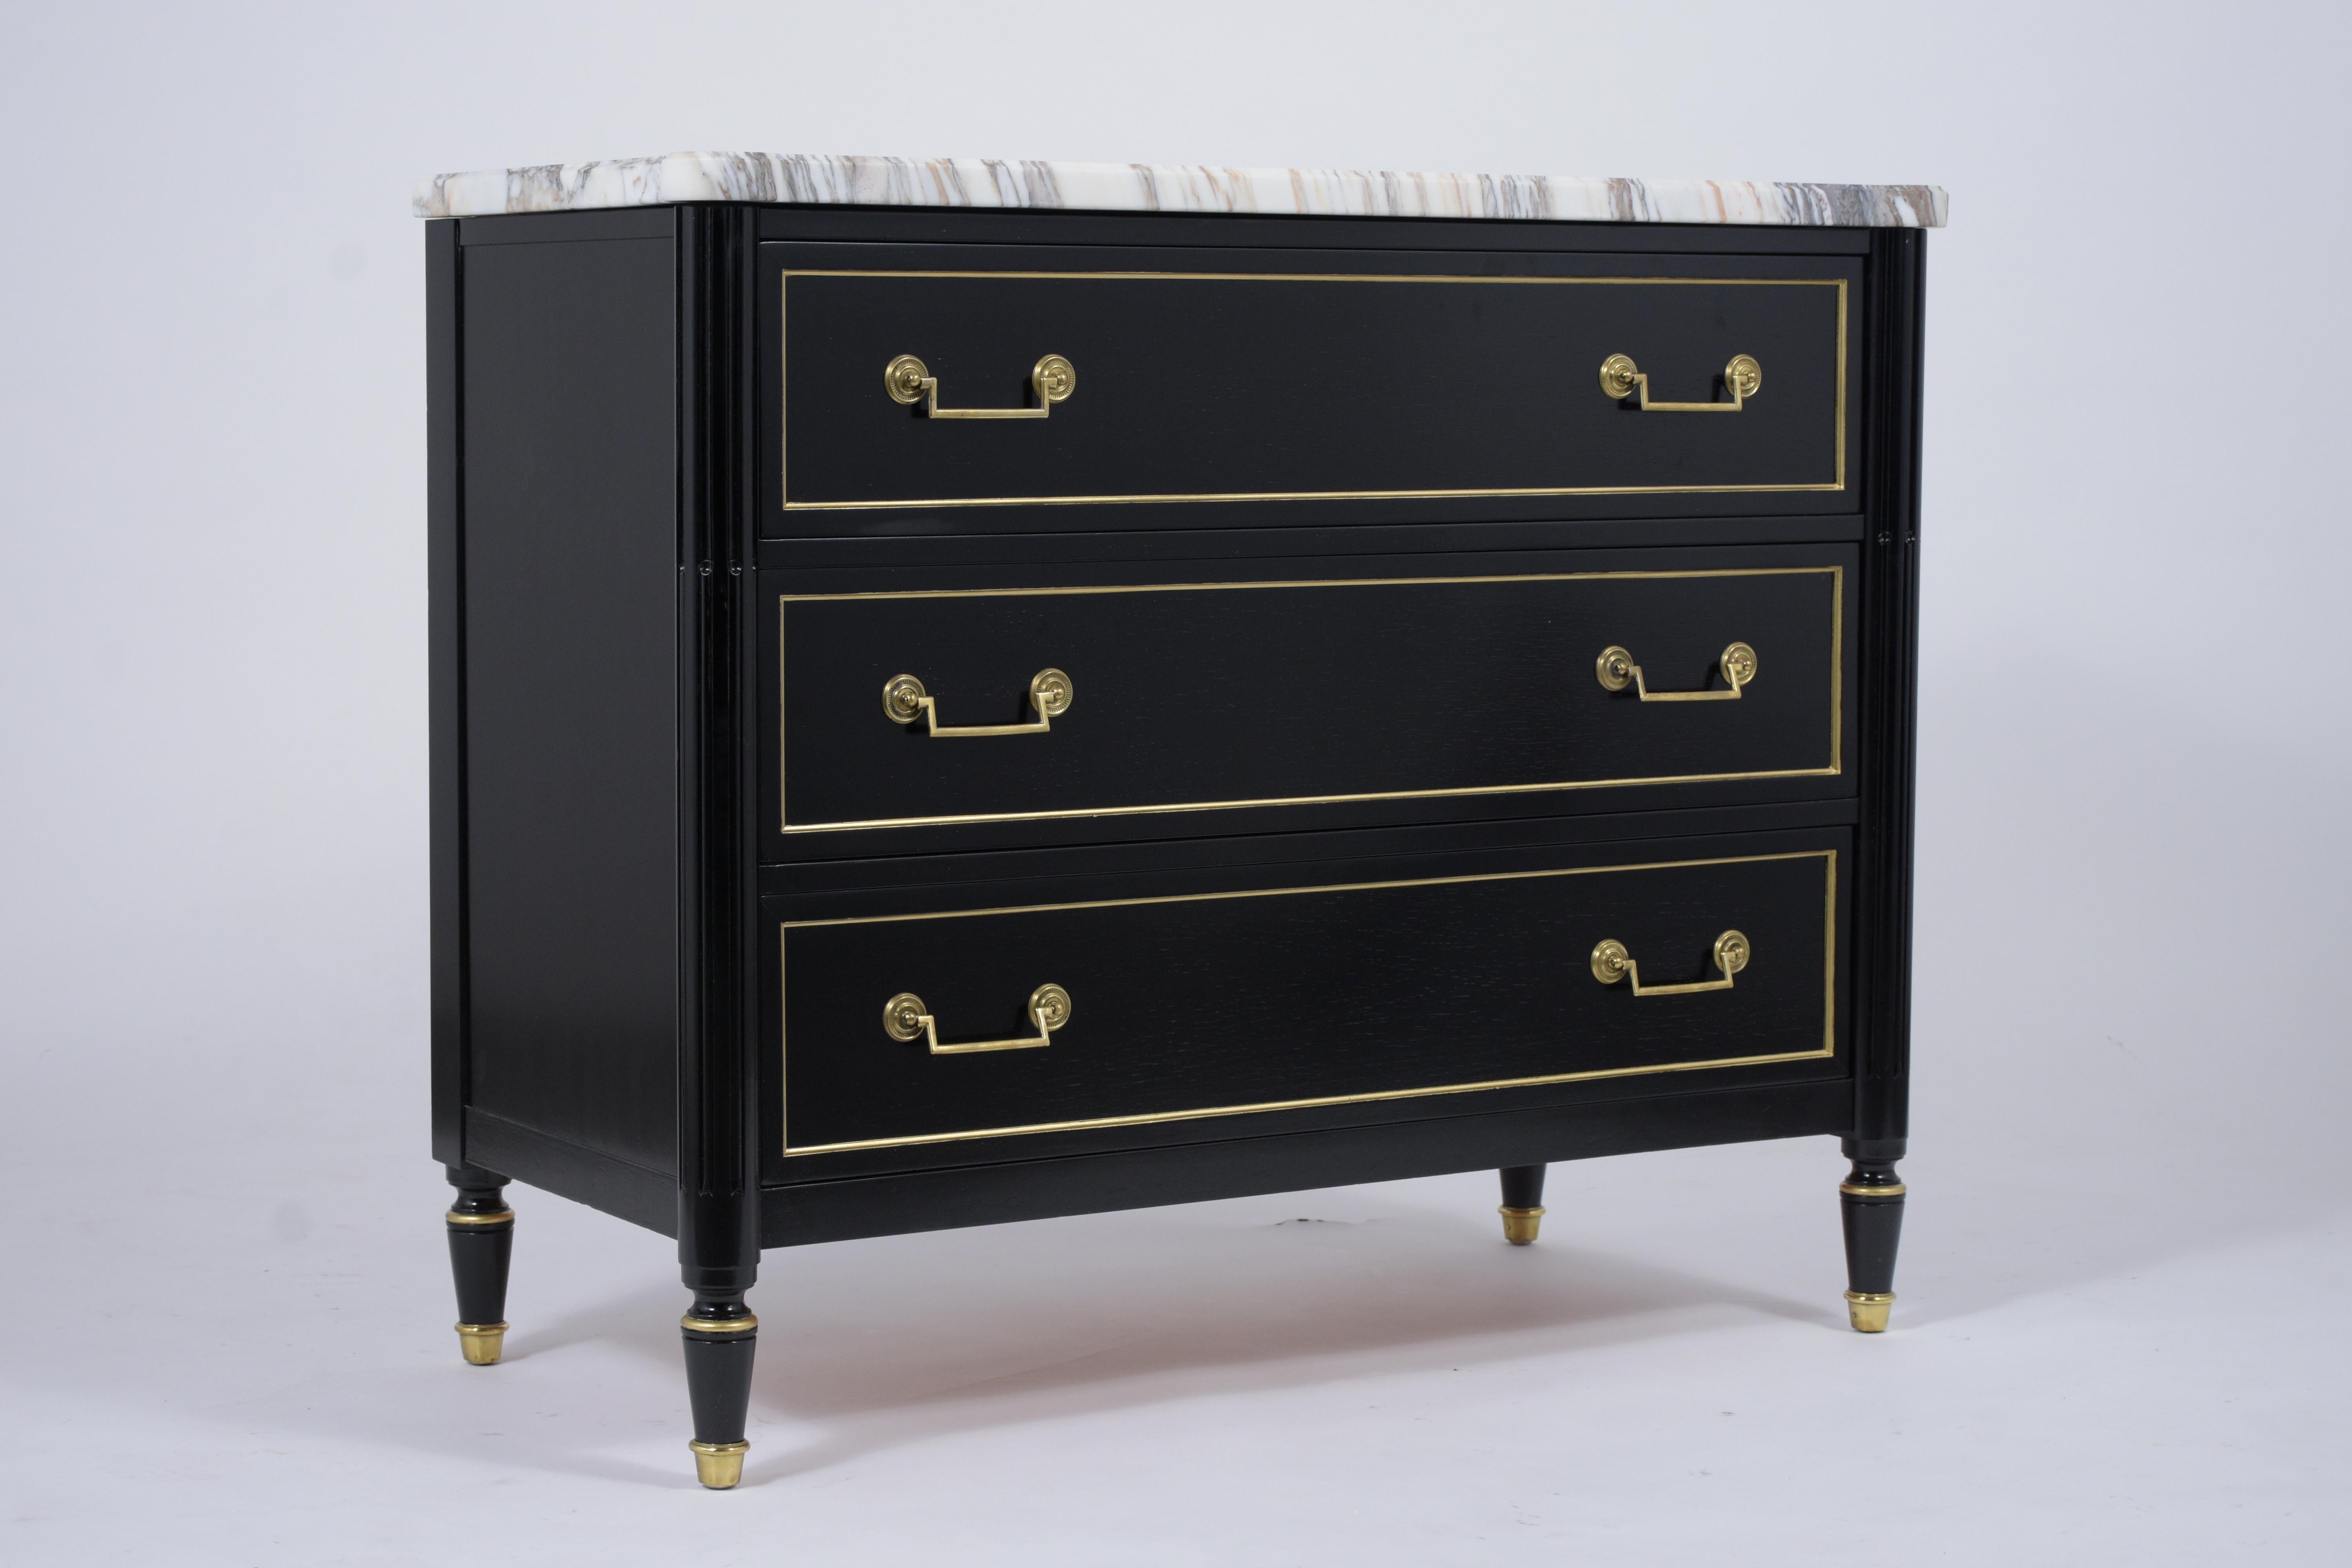 This elegant French Louis XVI ebonized commode is made out of mahogany wood and has a new ebonized lacquer finish. This antique dresser features a white Carrara marble with beveled edge details, three drawers framed by elegantly rounded giltwood